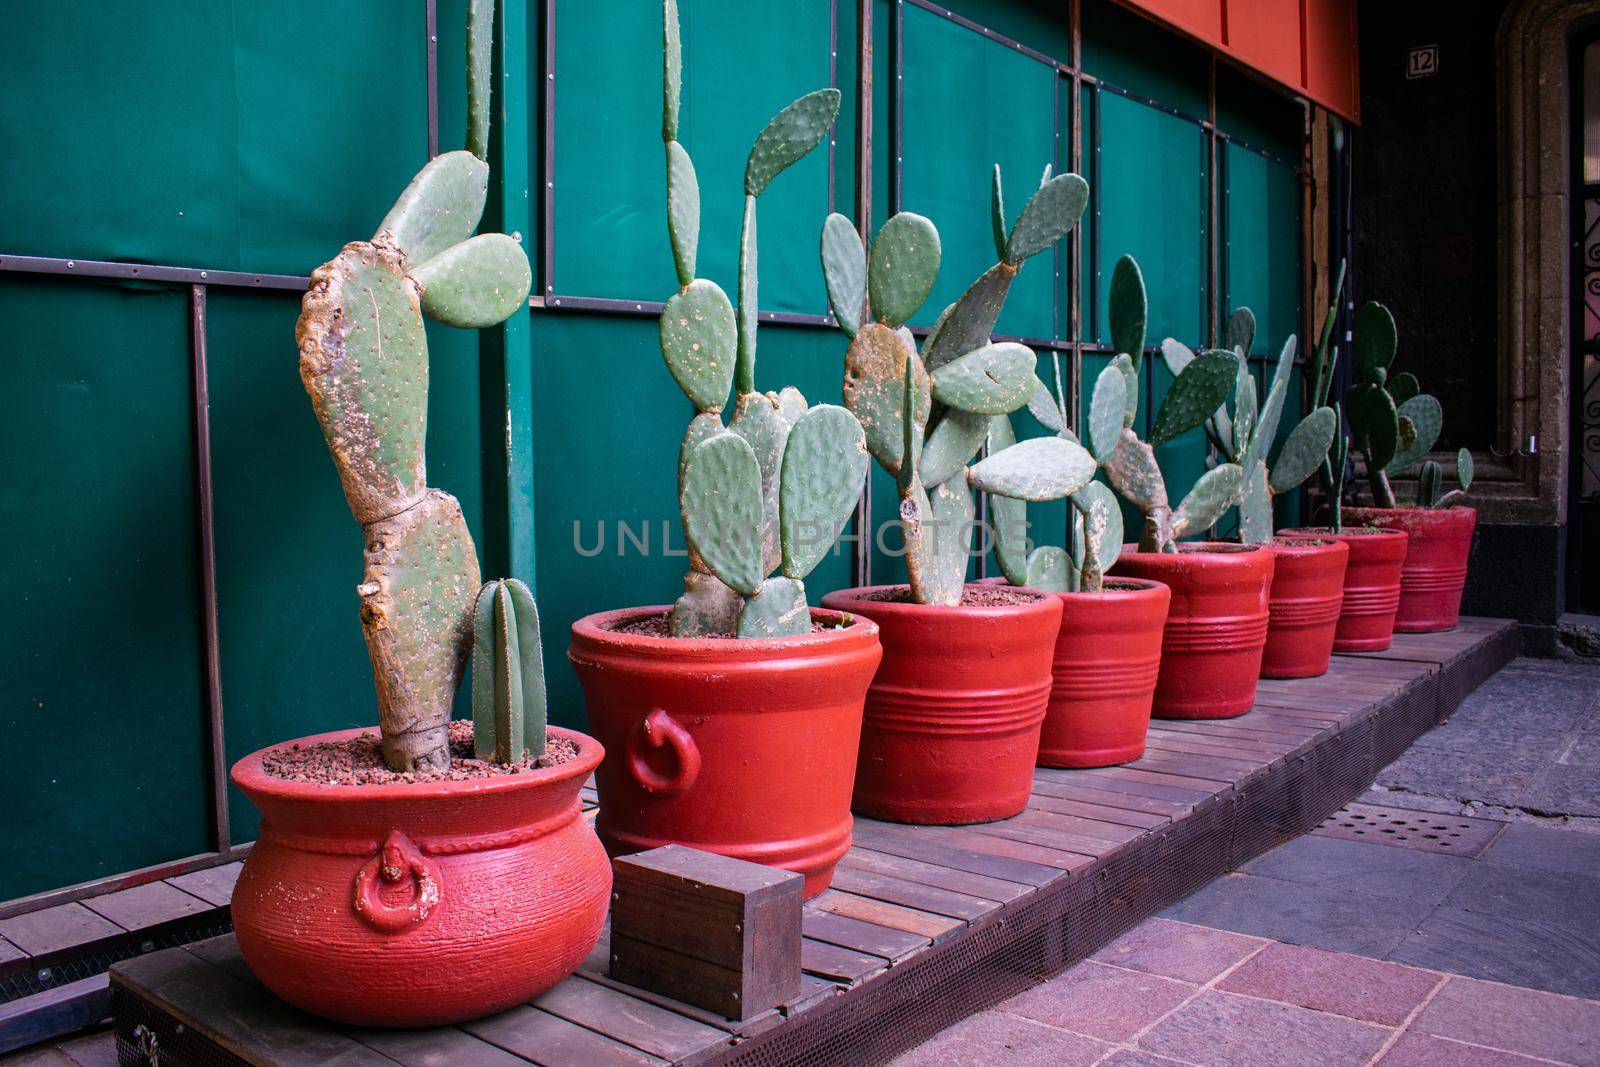 Row of nopales in brown pots on wooden floor and next to green metal wall. Mexican spiky plants in clay pots above wood surface. Traditional plants and food